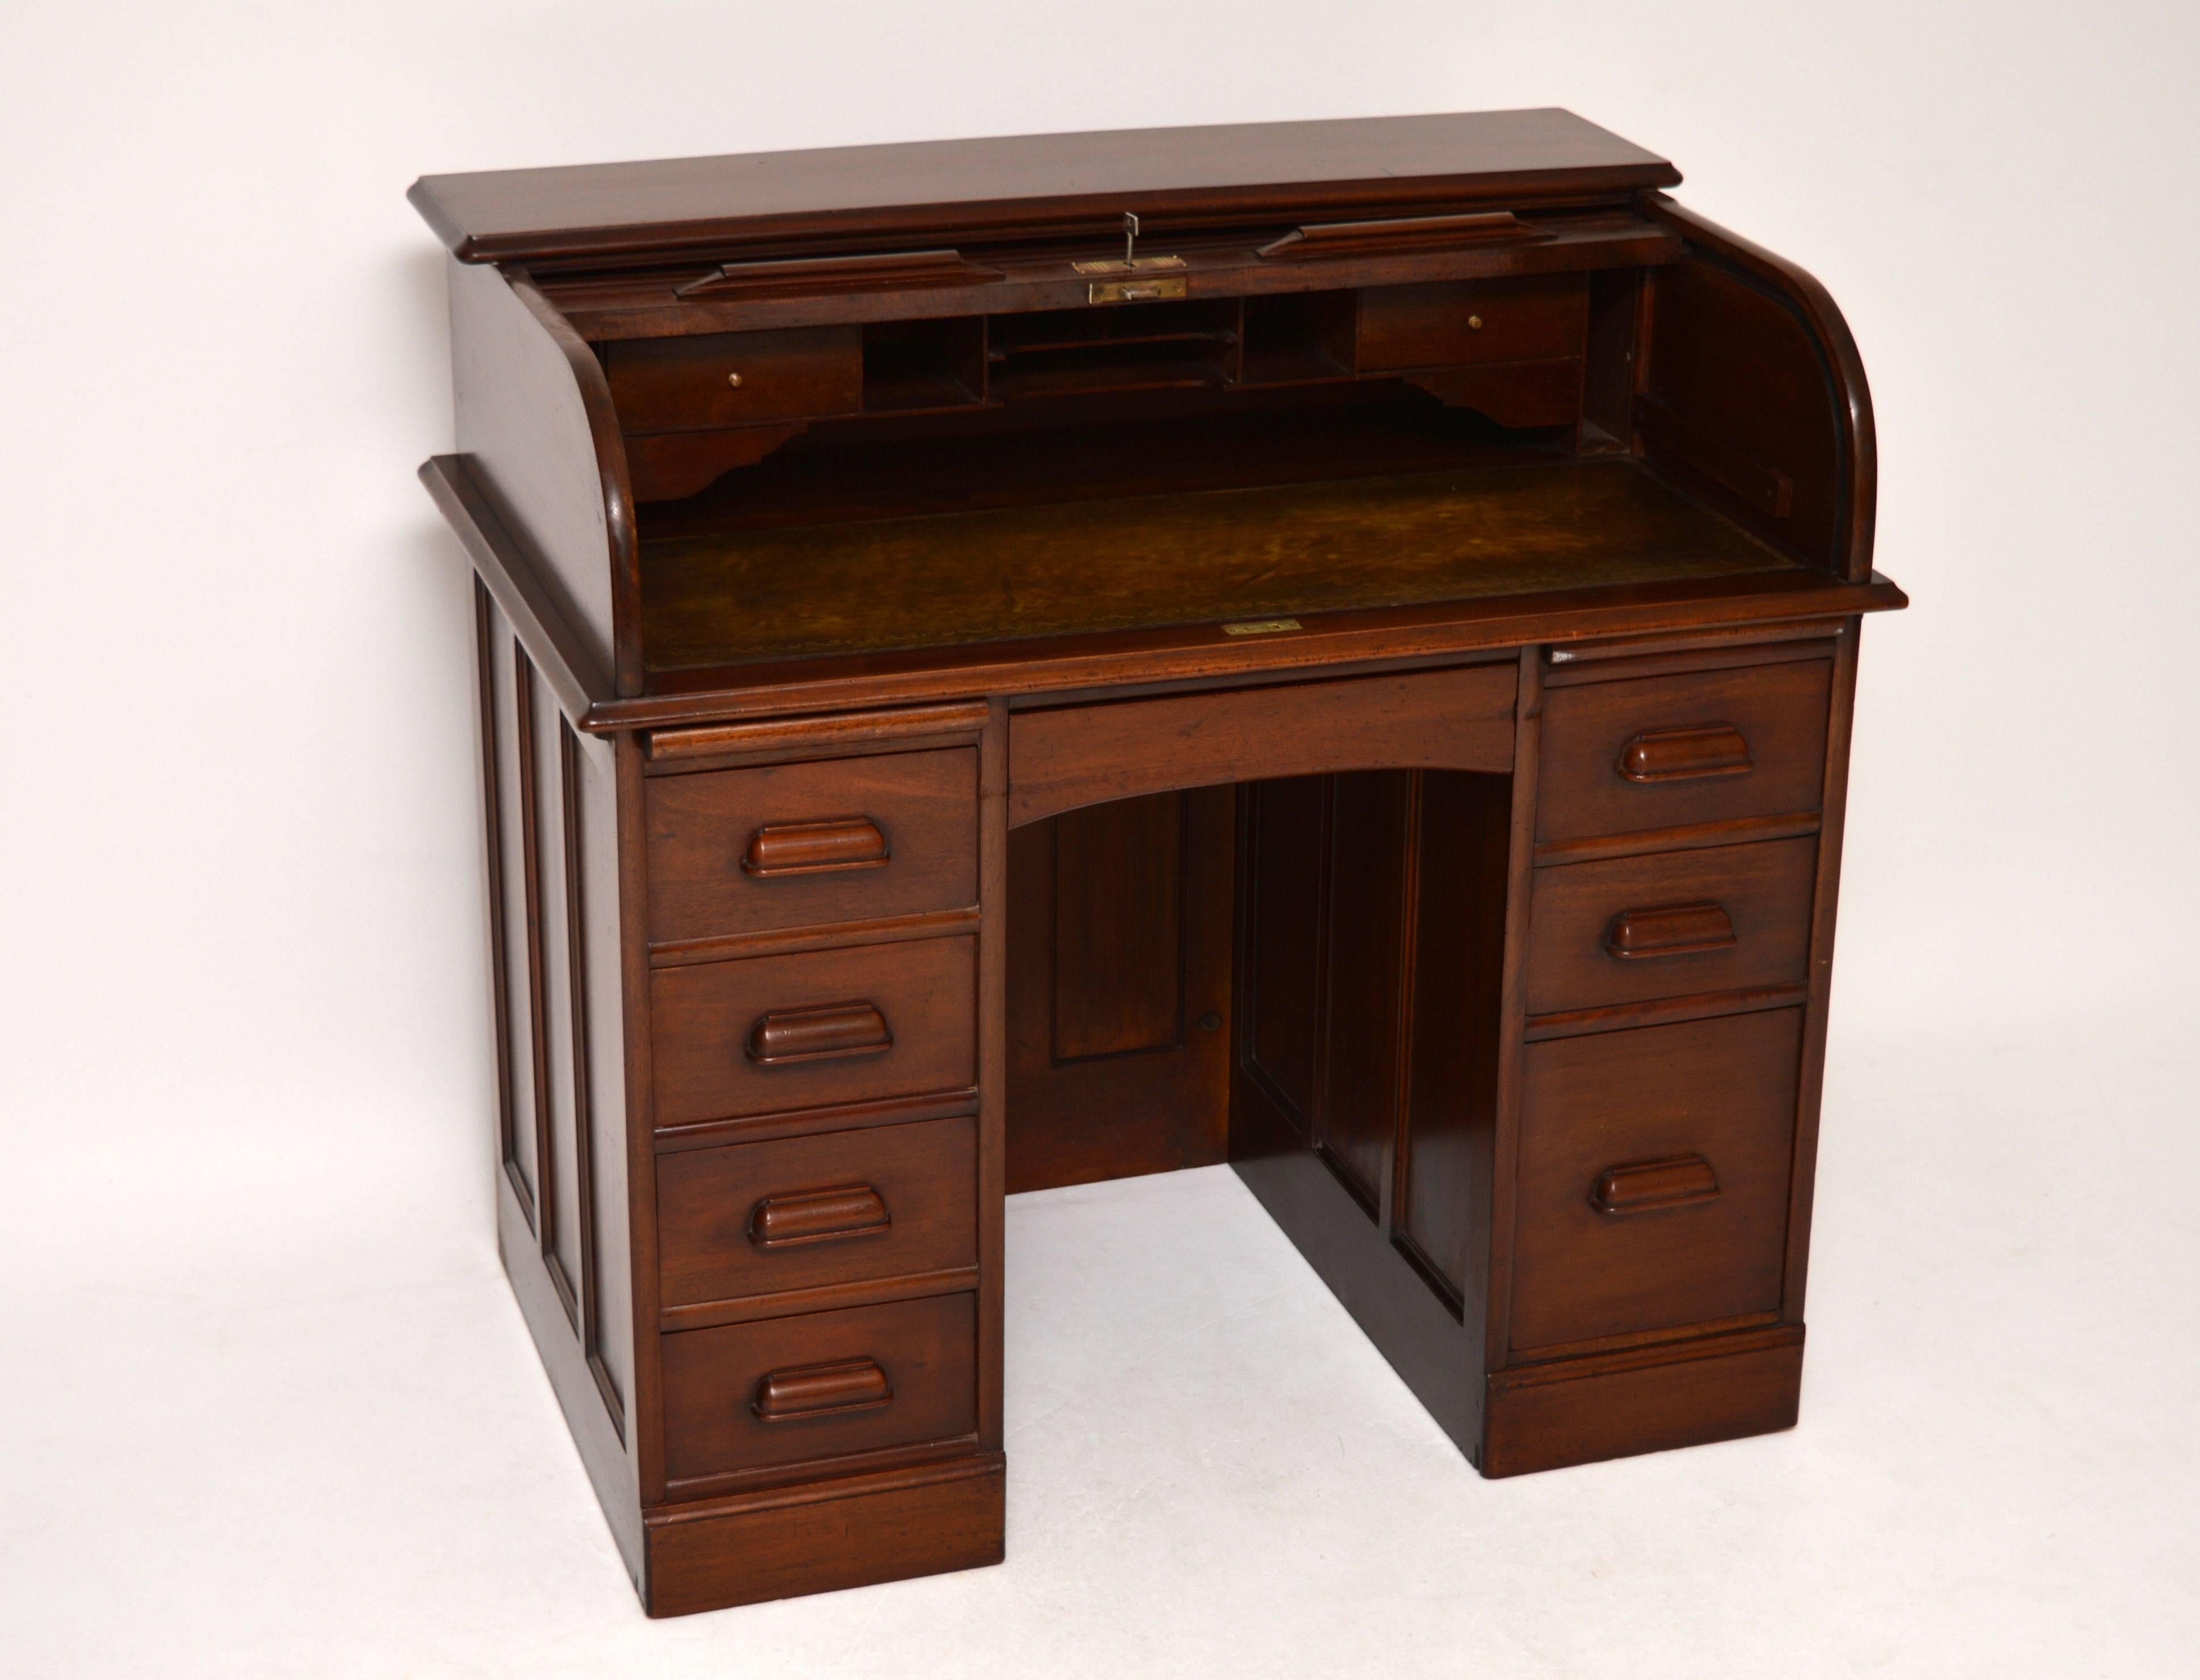 This antique mahogany roll top desk is a nice compact size and in good original condition, dating from around the 1910s-1920s period. It's also very well made with some nice features. This desk looks great from all angles. The back, inside back and